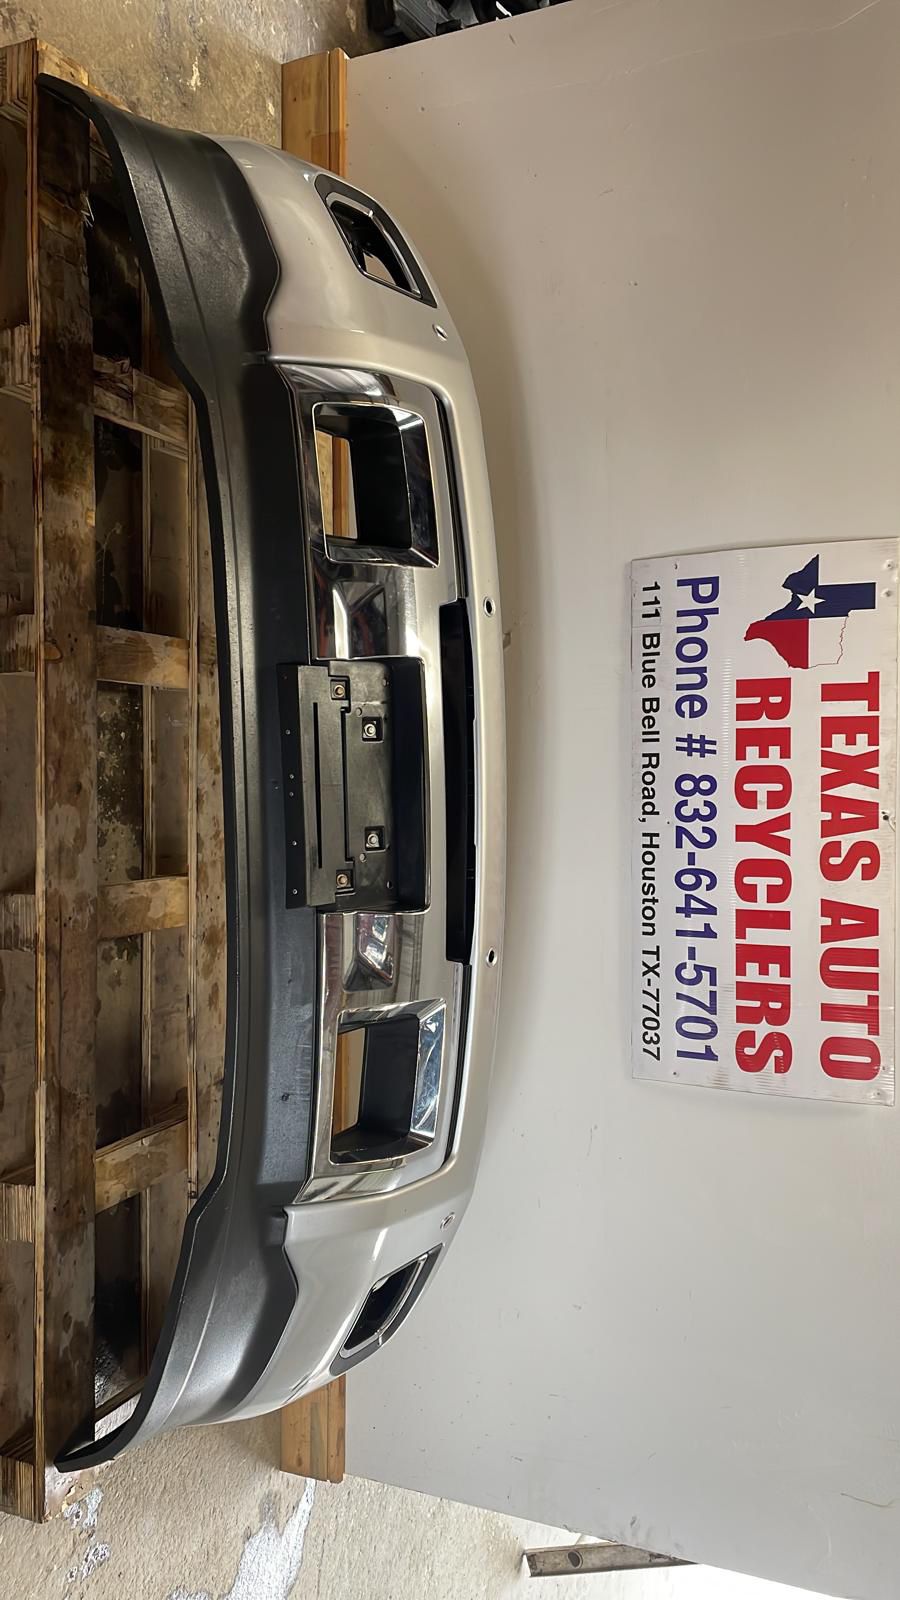 Front Bumper 2014-2019 Gmc Sierra Denali 2(contact info removed). Great Condition.